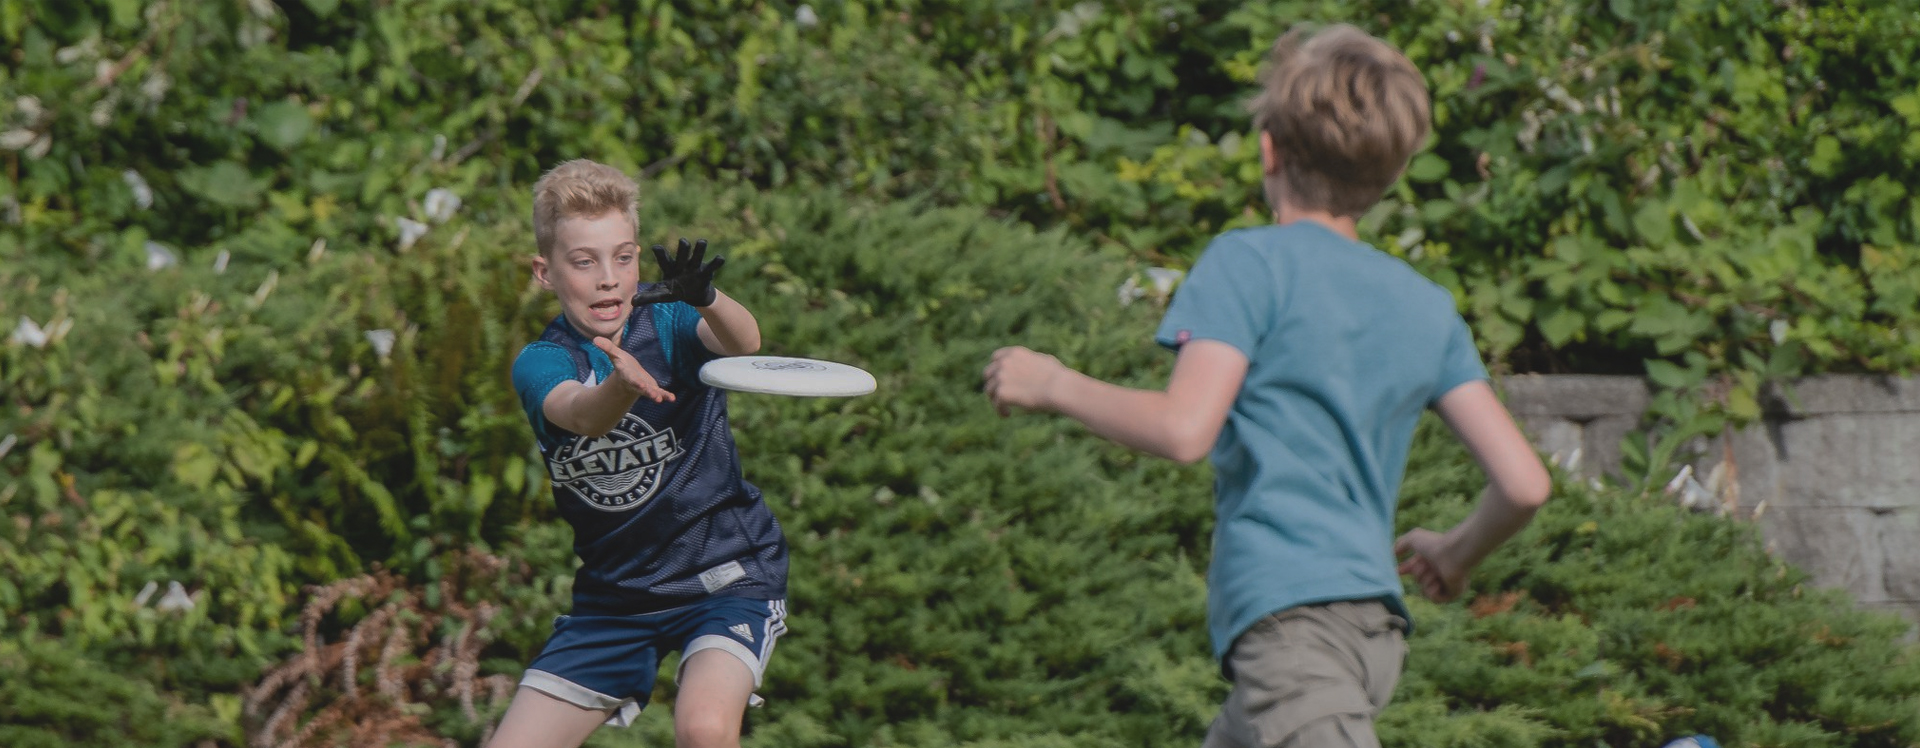 weekl2 frisbee camp for kids vancouver